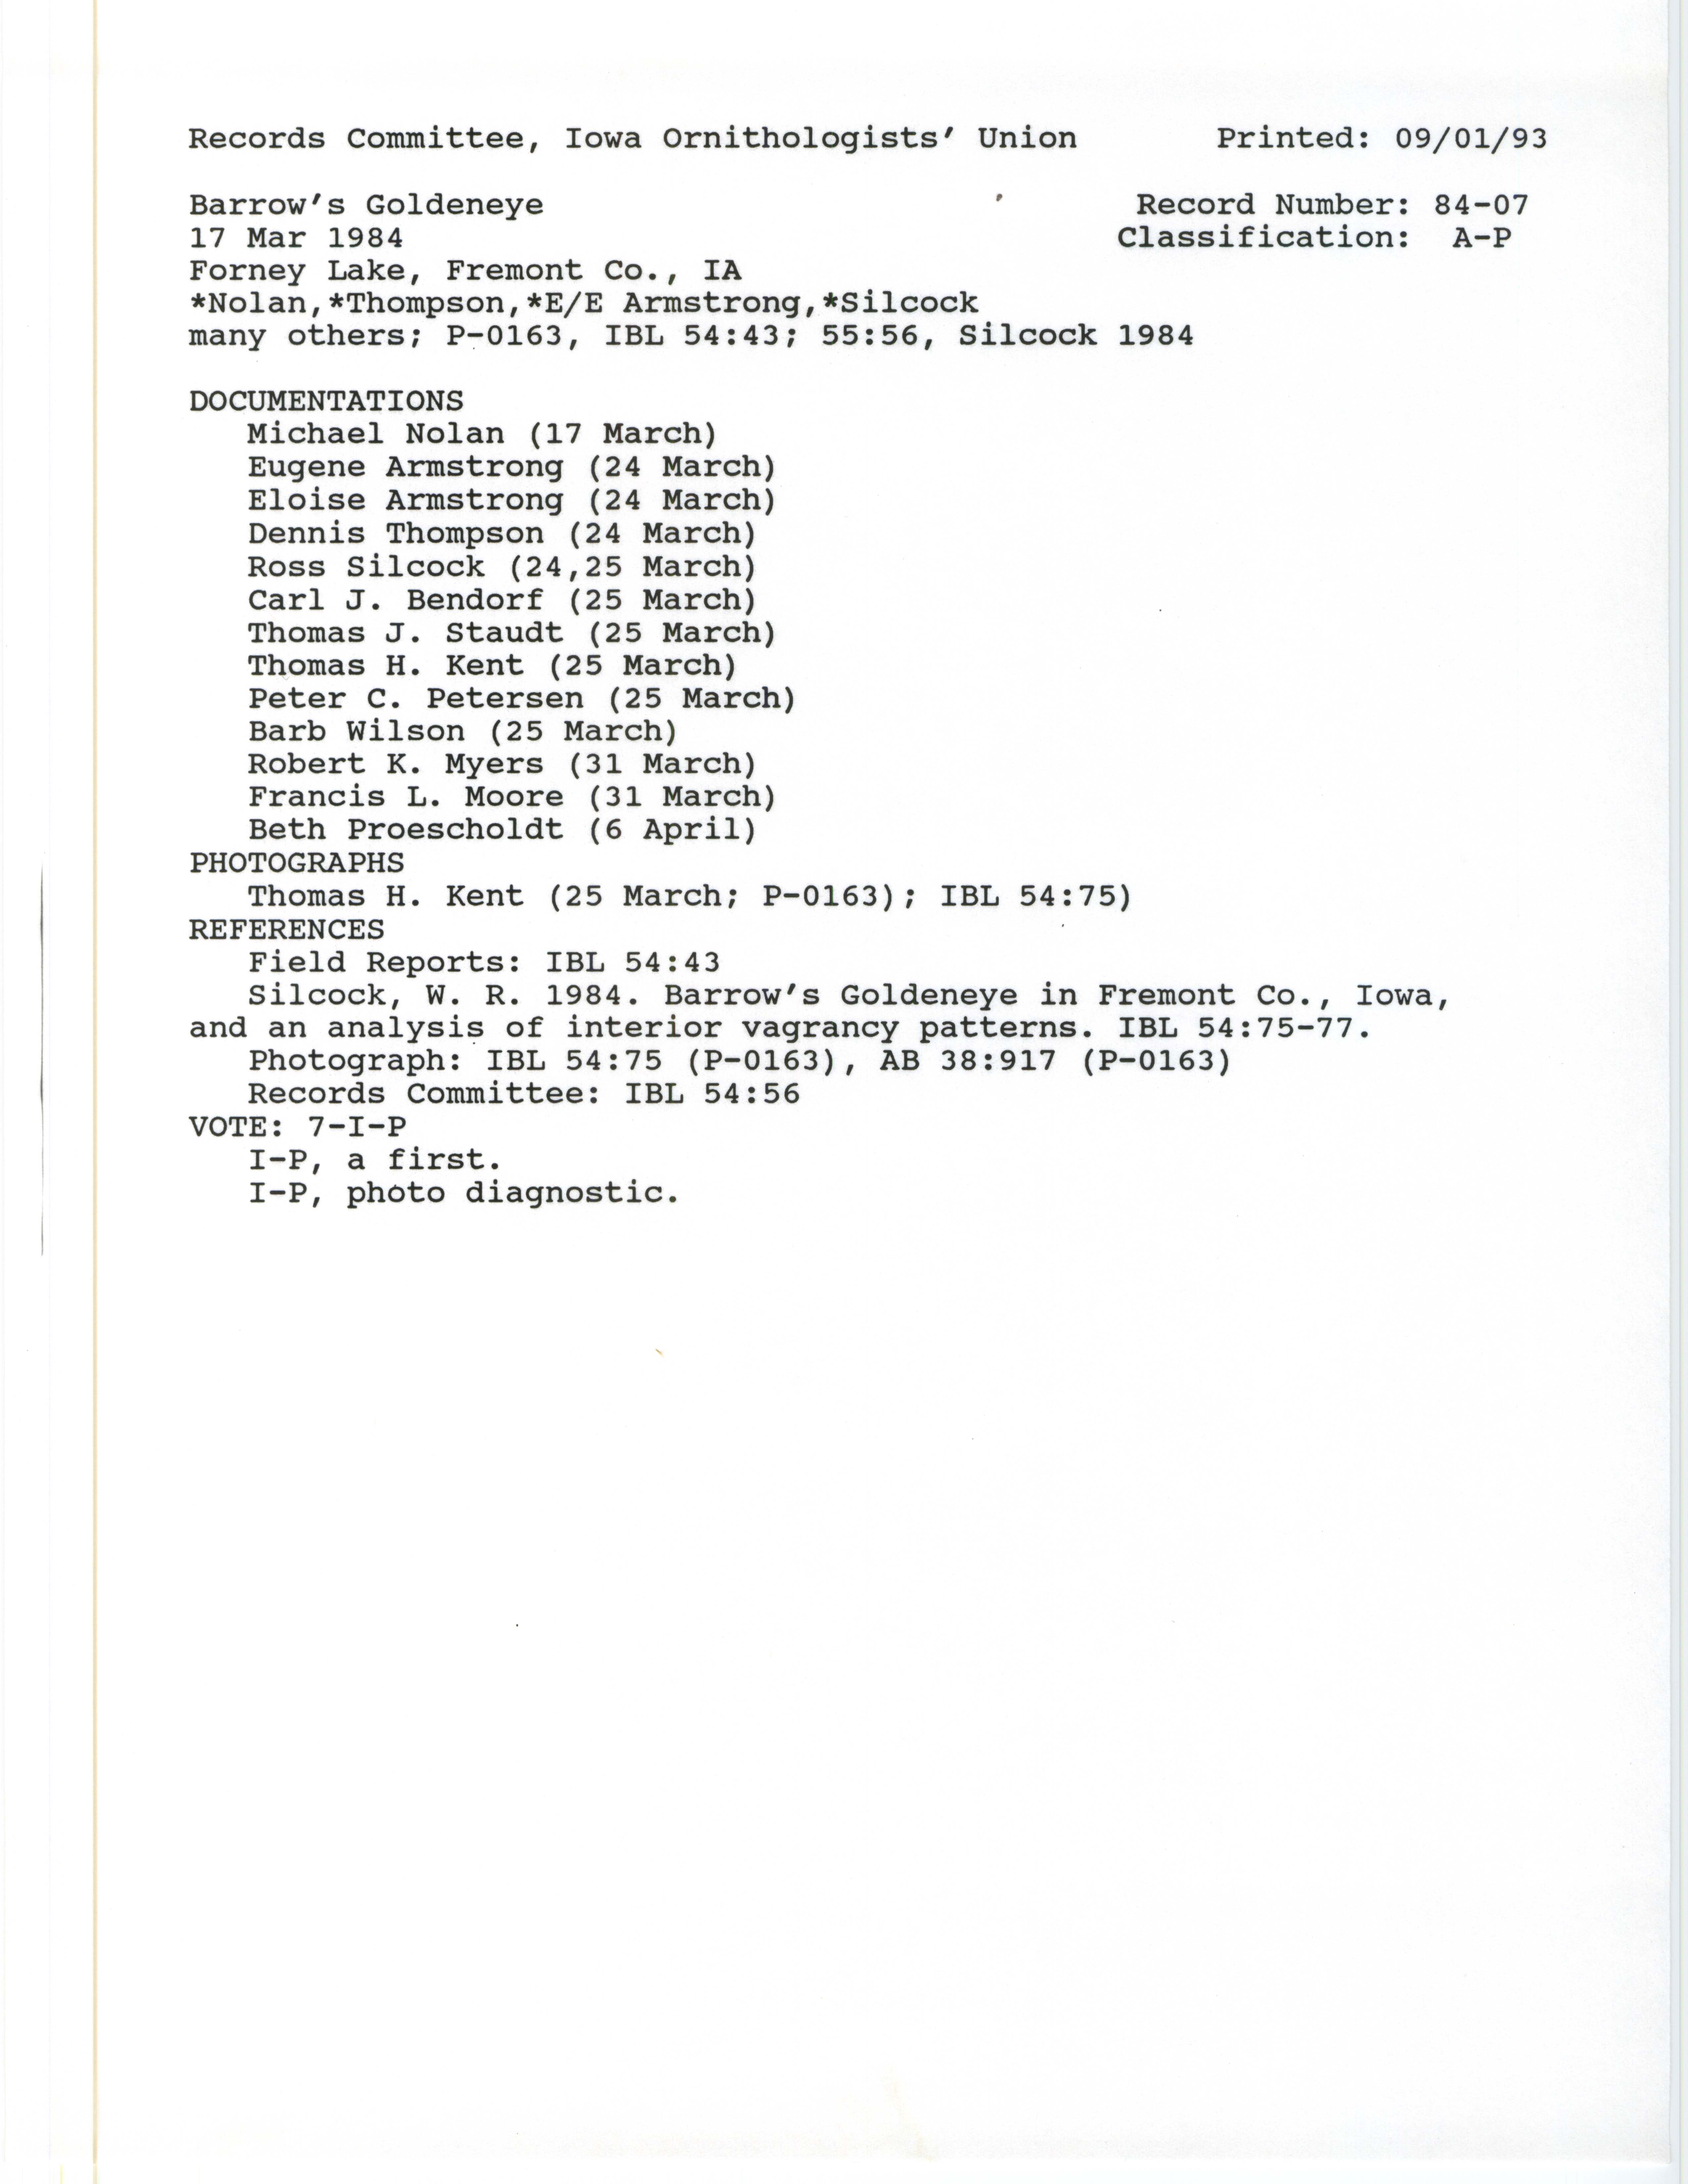 Records Committee review for rare bird sighting for Barrow's Goldeneye at Forney Lake, 1984